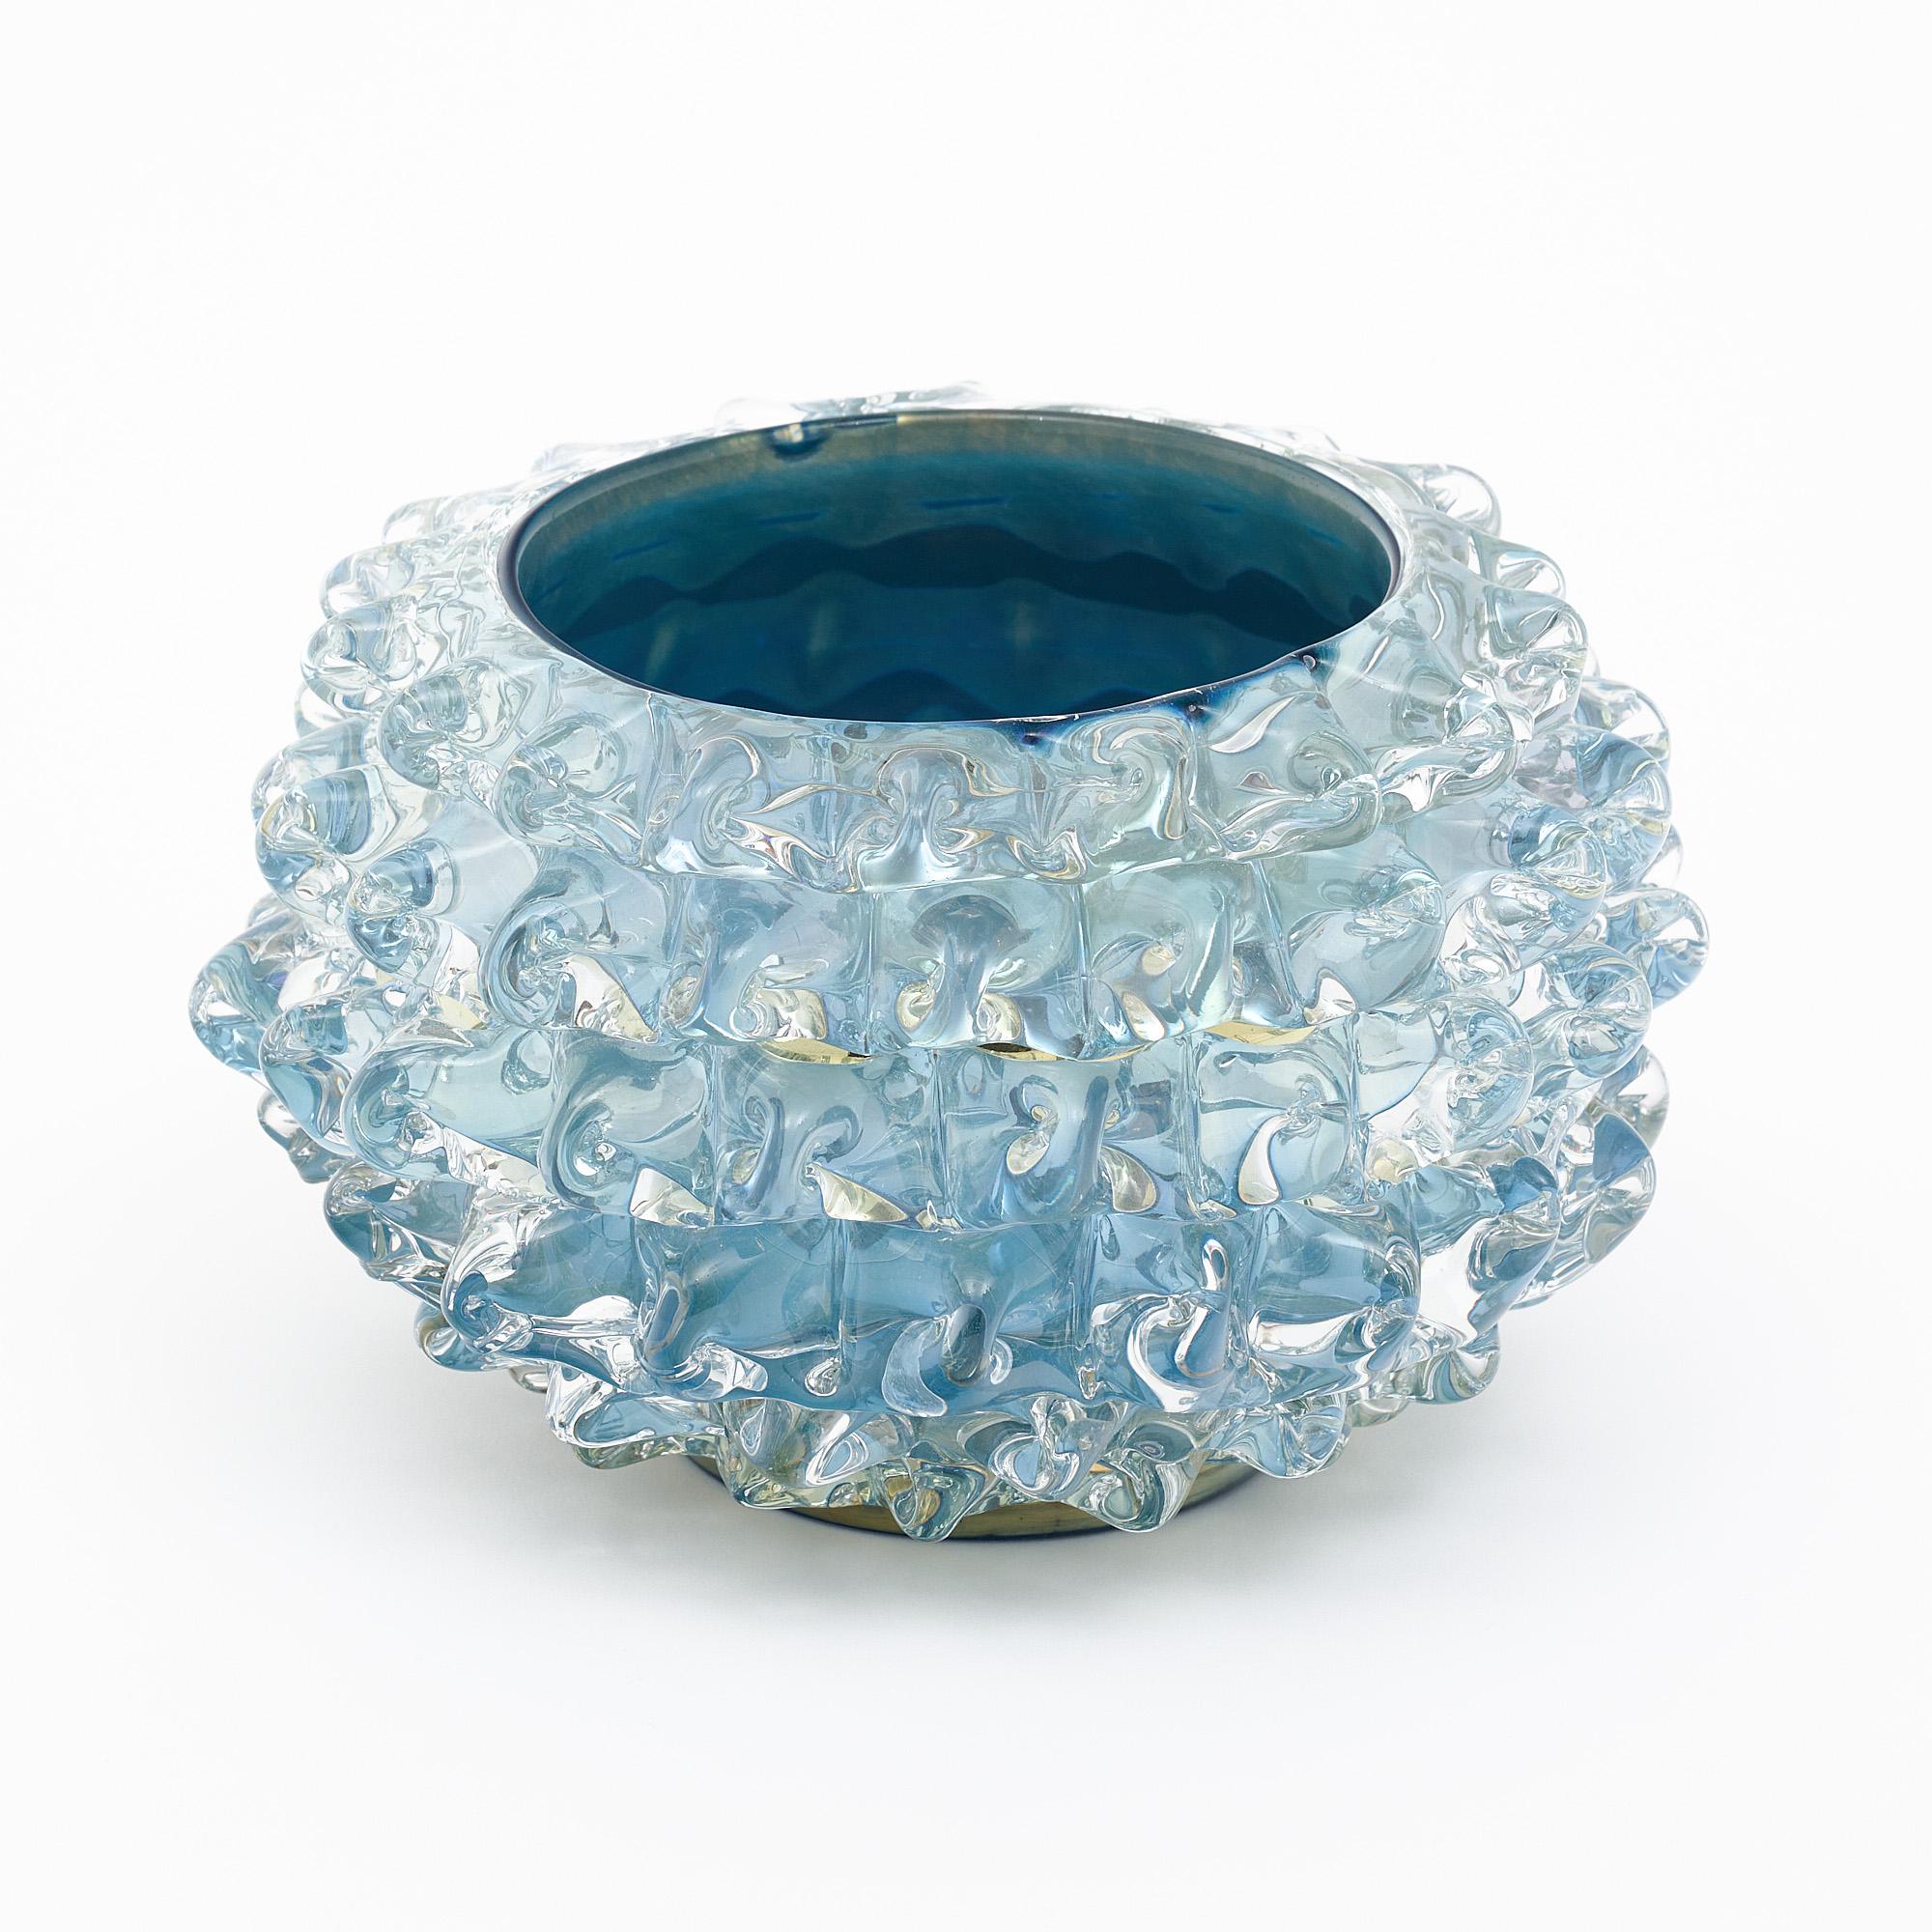 Murano glass bowl, Italian, from the island of Murano and crafted in the manner of Barovier. This hand-blown piece is made using the incamiciato technique where several layers of varying colors are used to create a unique color and depth. It also